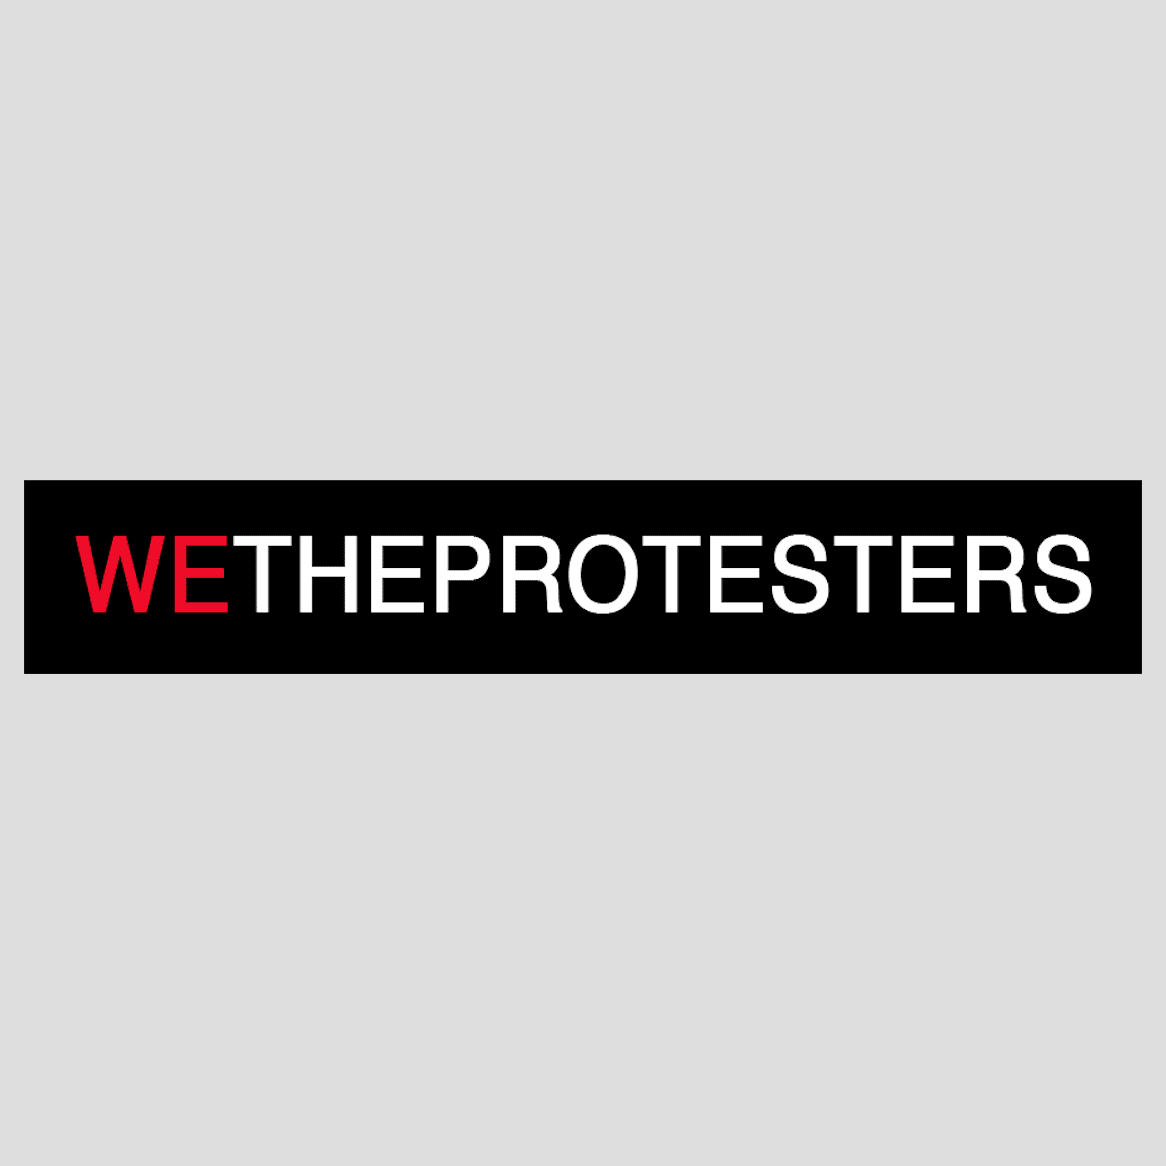 We The Protesters logo